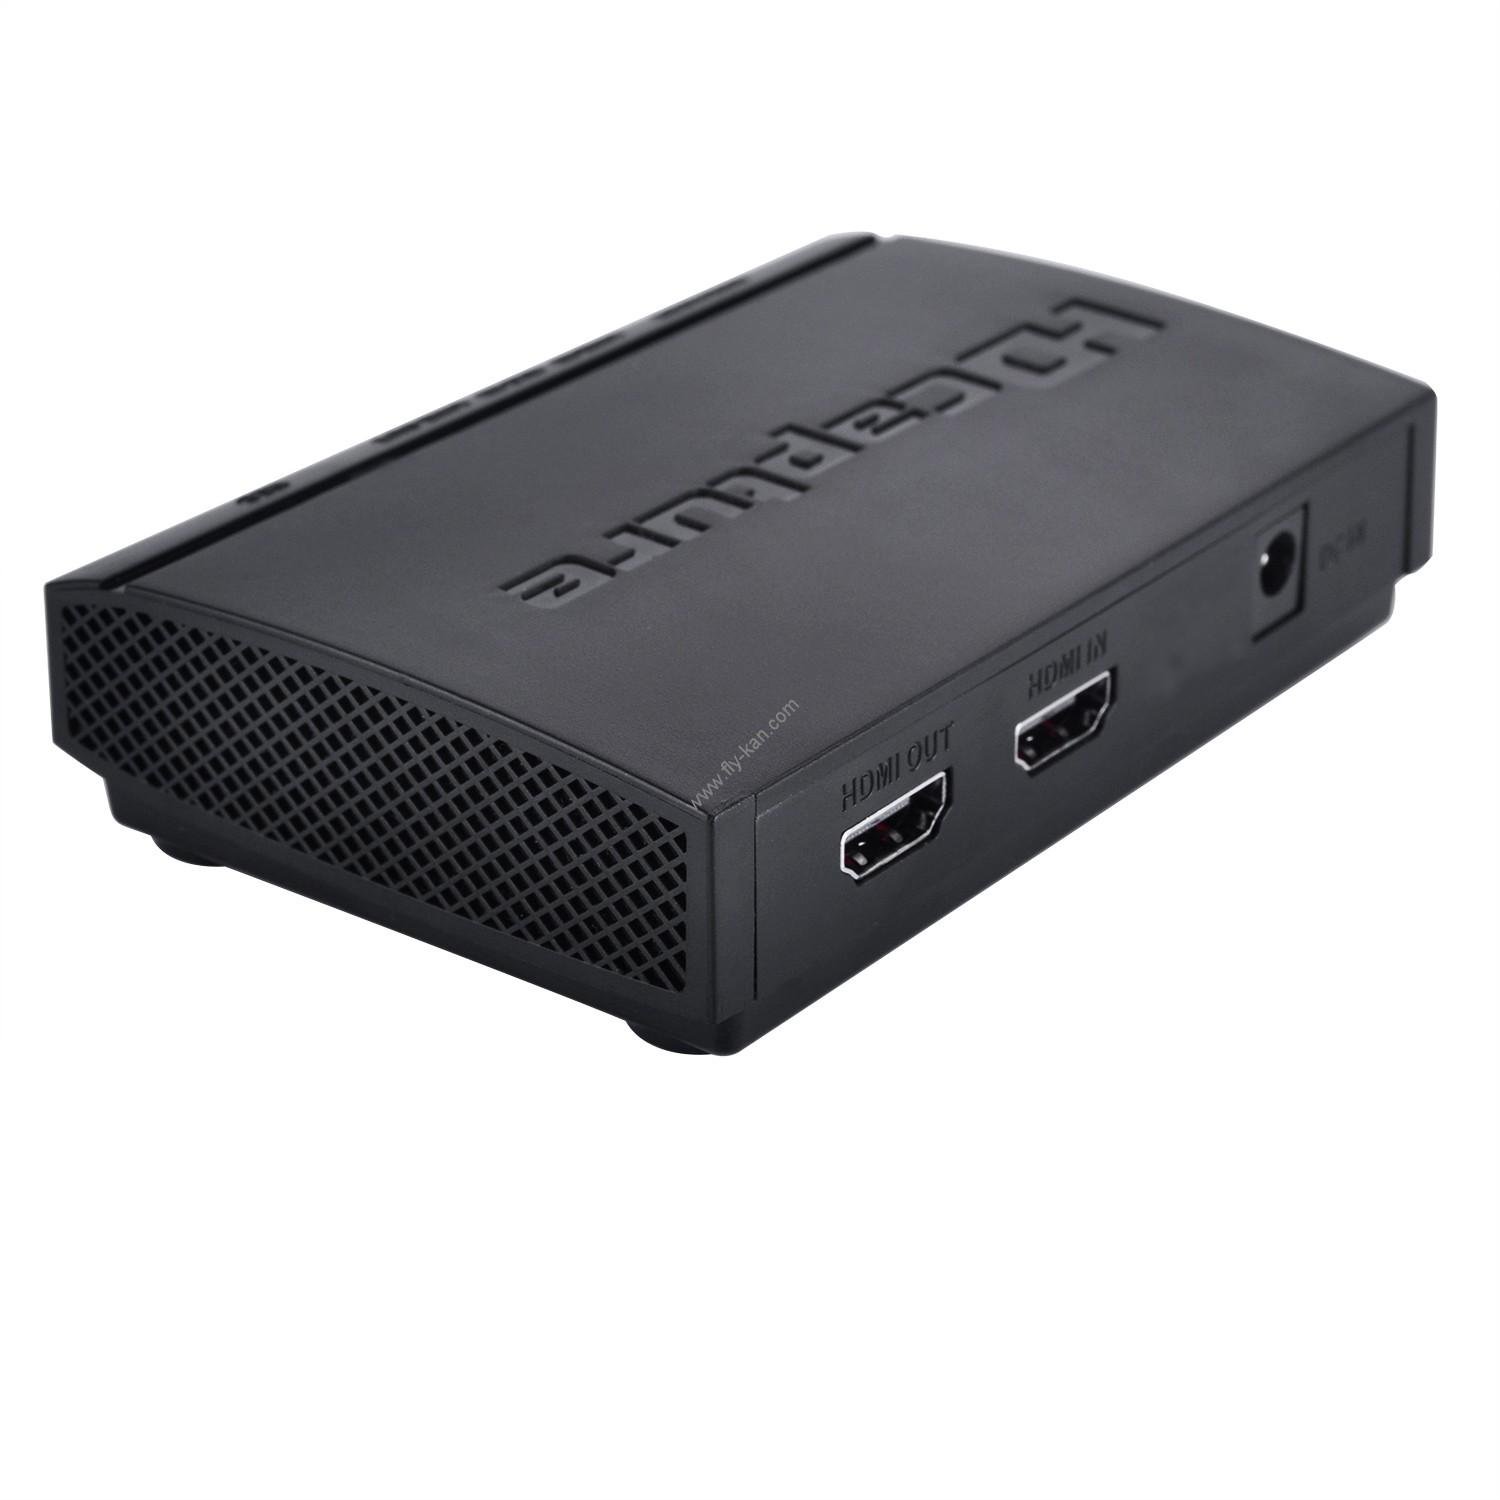 Standalone HD Video Capture Box With Mic Input 3